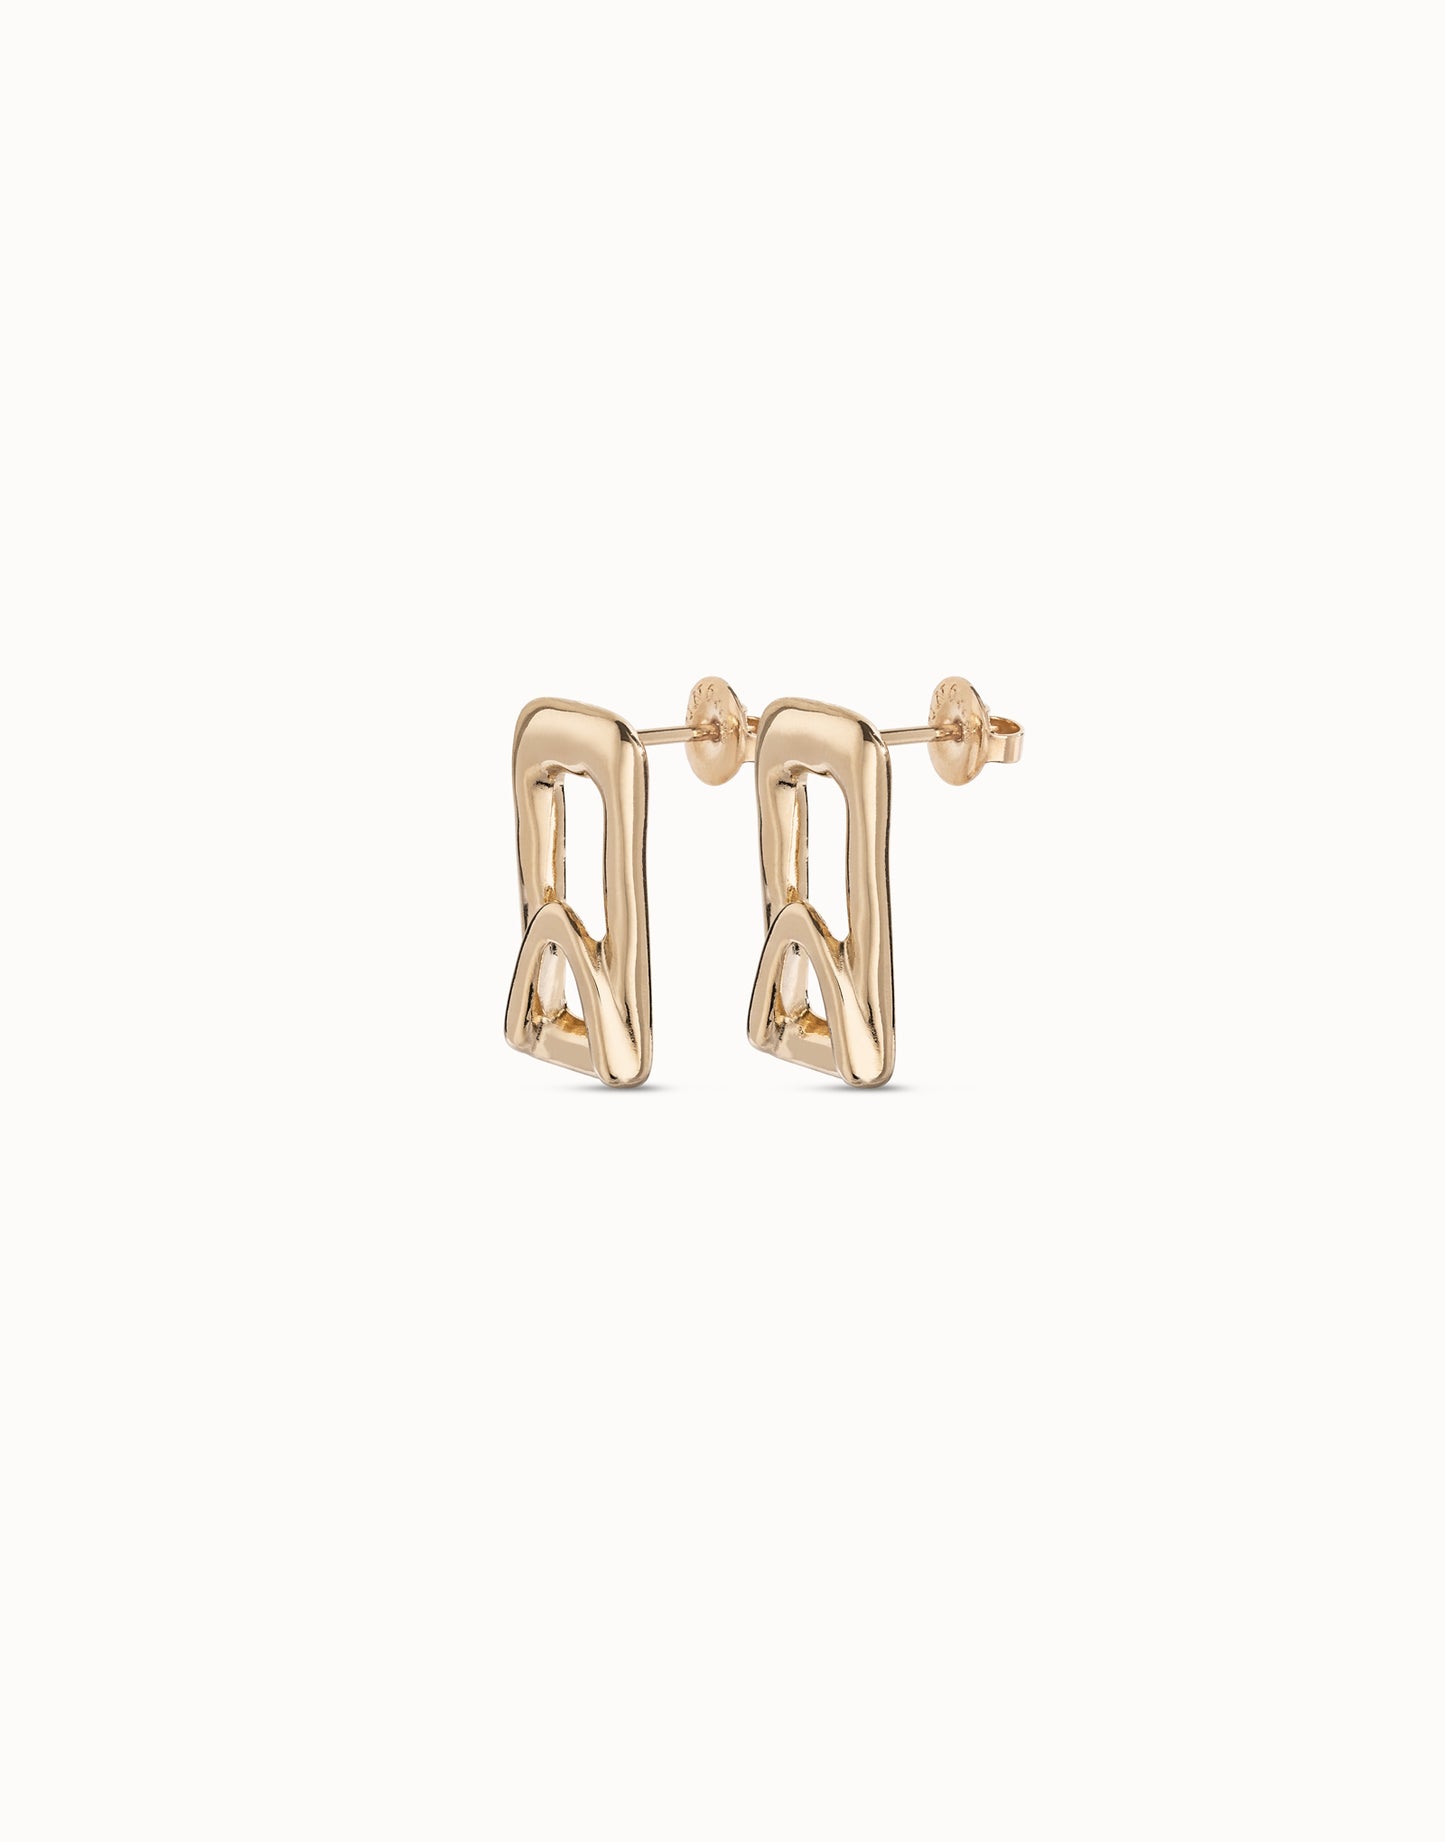 UNO de 50 Stand Out Earrings